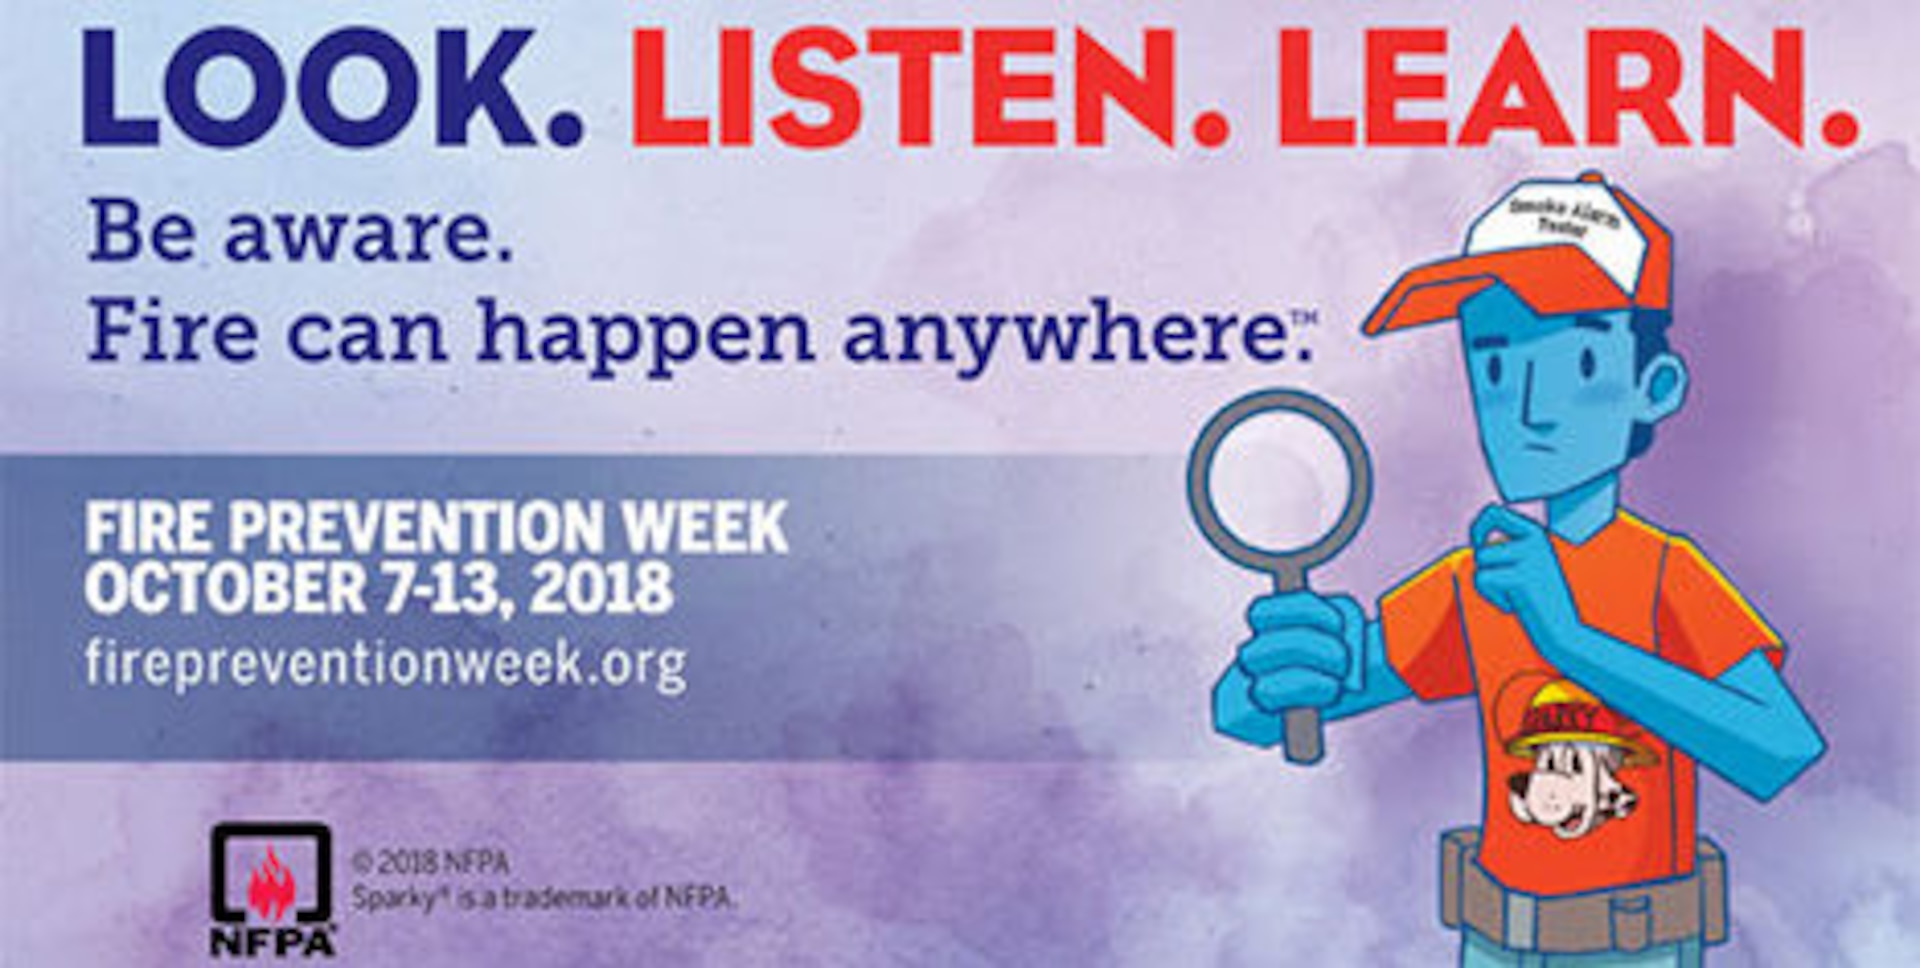 This year’s Fire Prevention Week campaign, “Look. Listen. Learn. Be aware. Fire can happen anywhere,” works to educate about three basic but essential steps to take to reduce the likelihood of having a fire – and how to escape safely in the event of one. Fire Prevention Week is Oct. 7-13.